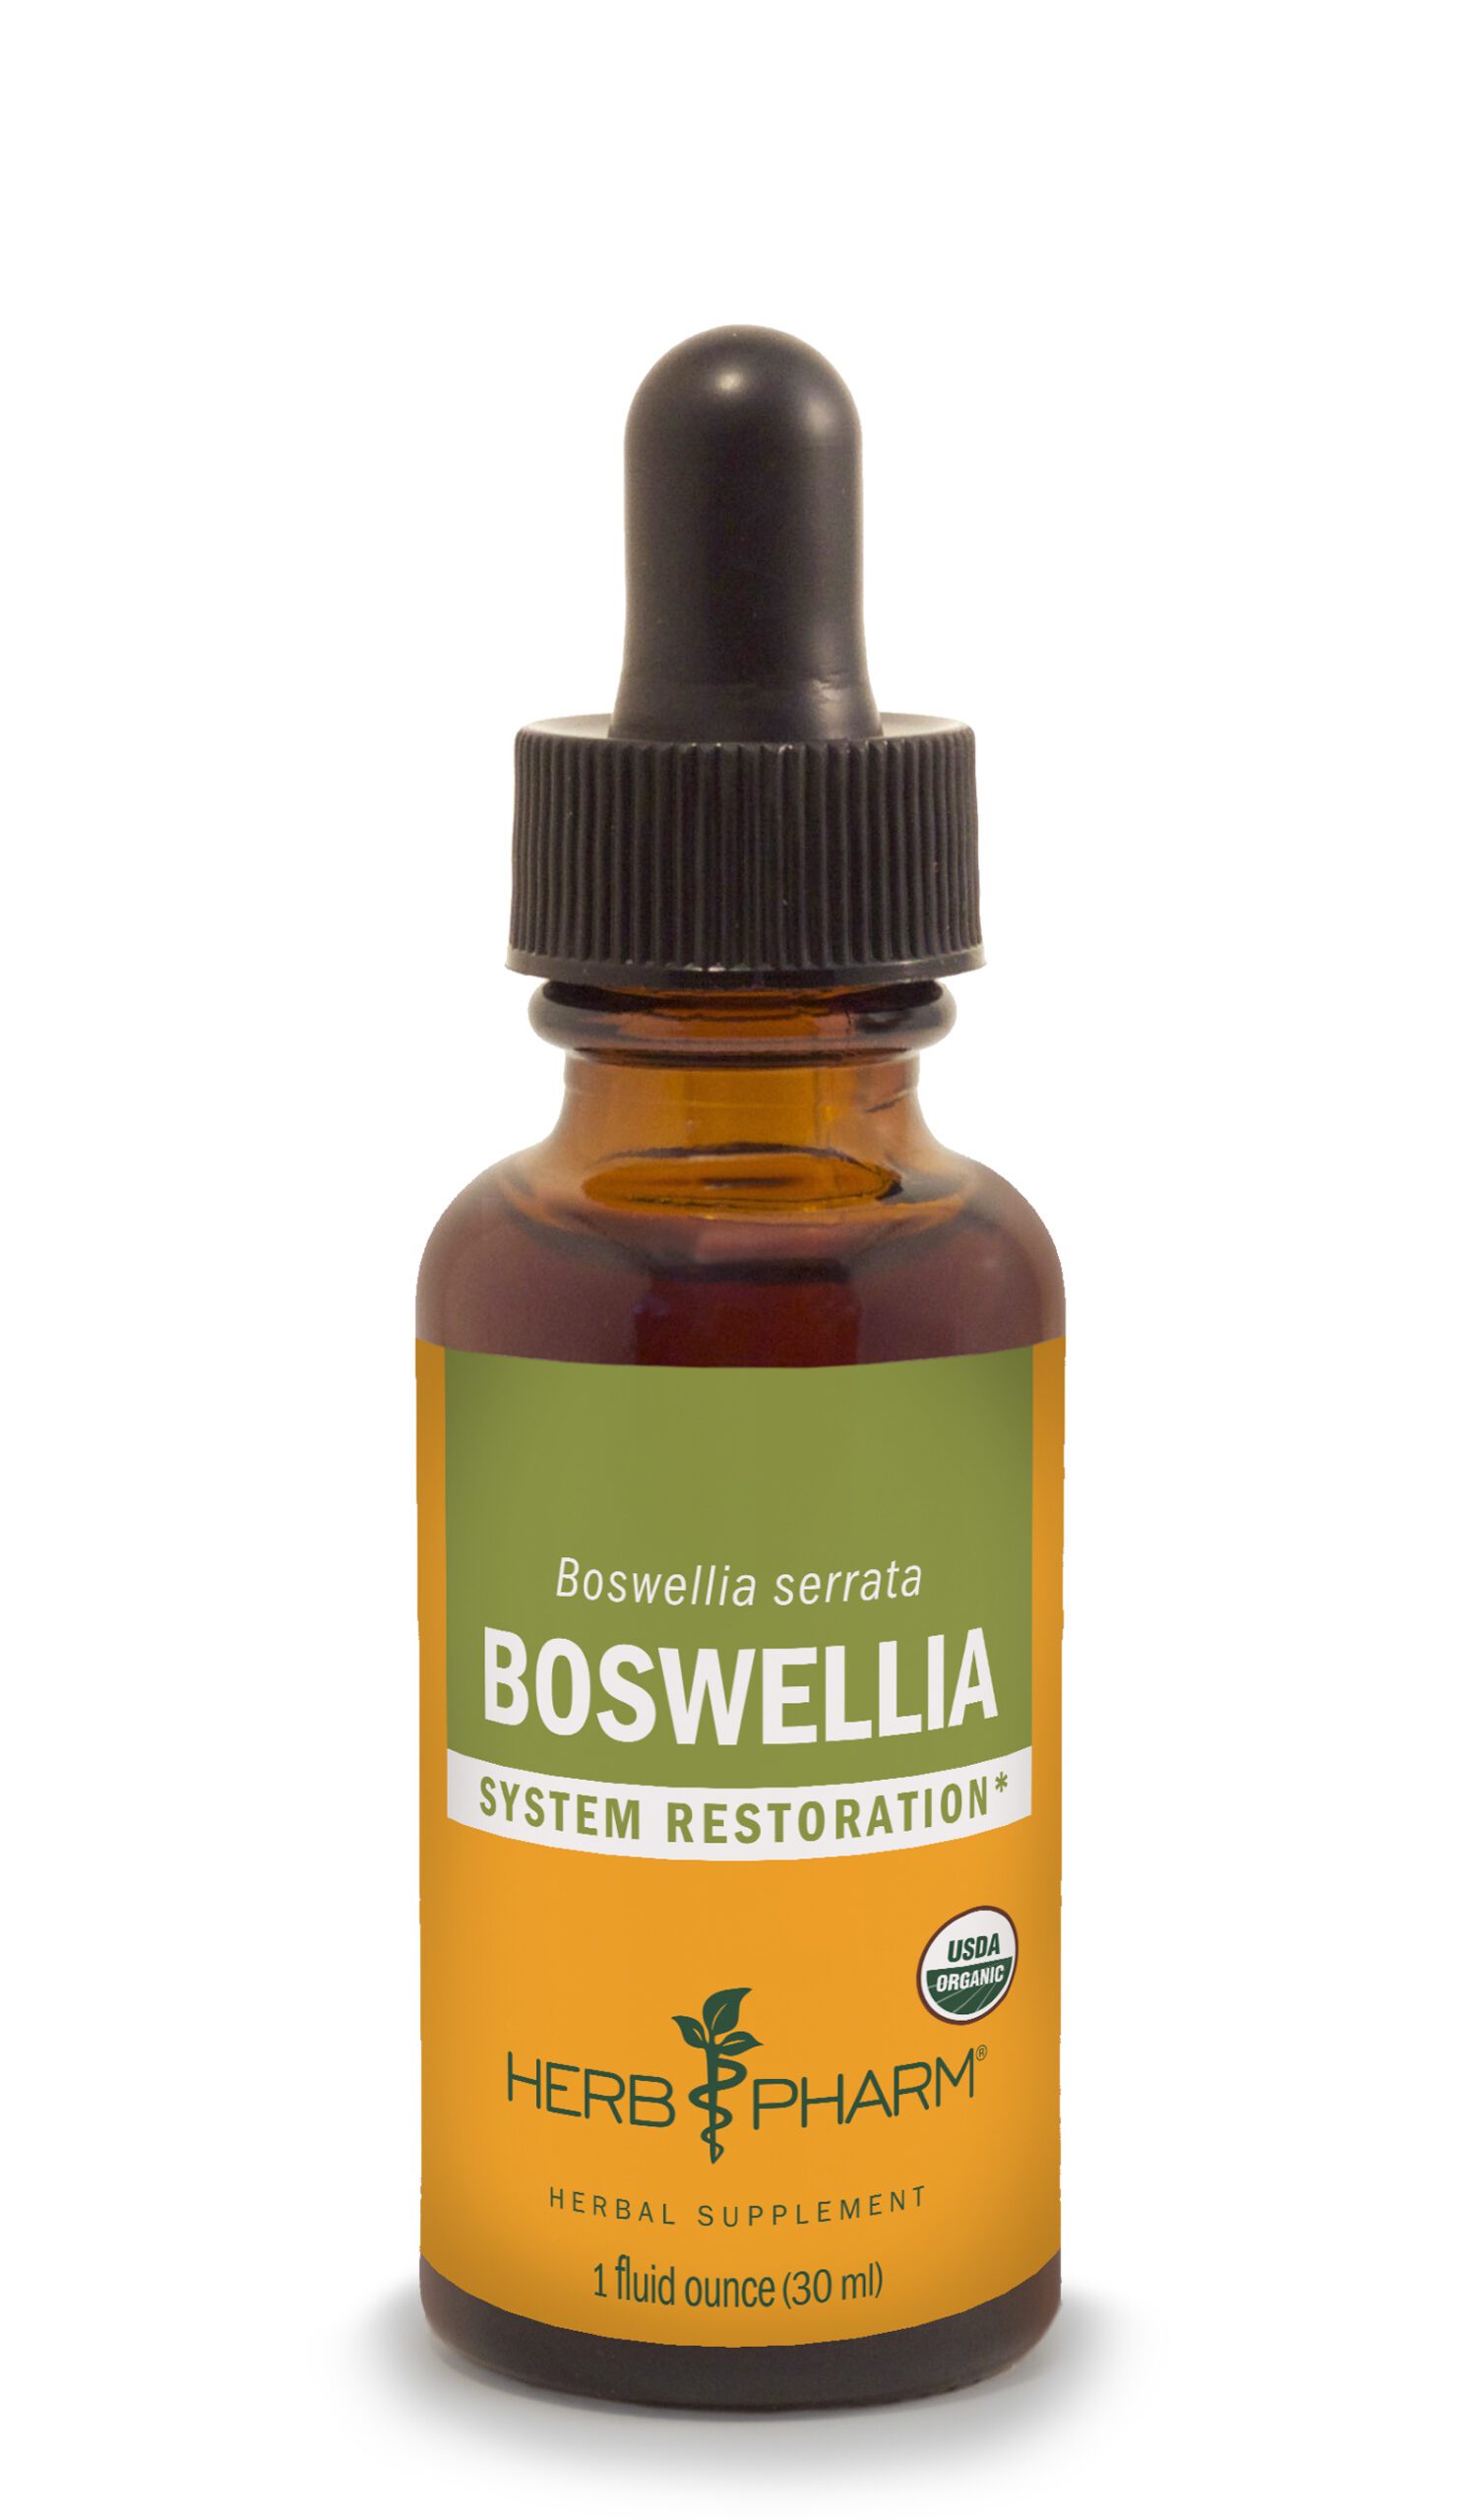 Product Listing Image for Herb Pharm Boswellia Tincture 1oz